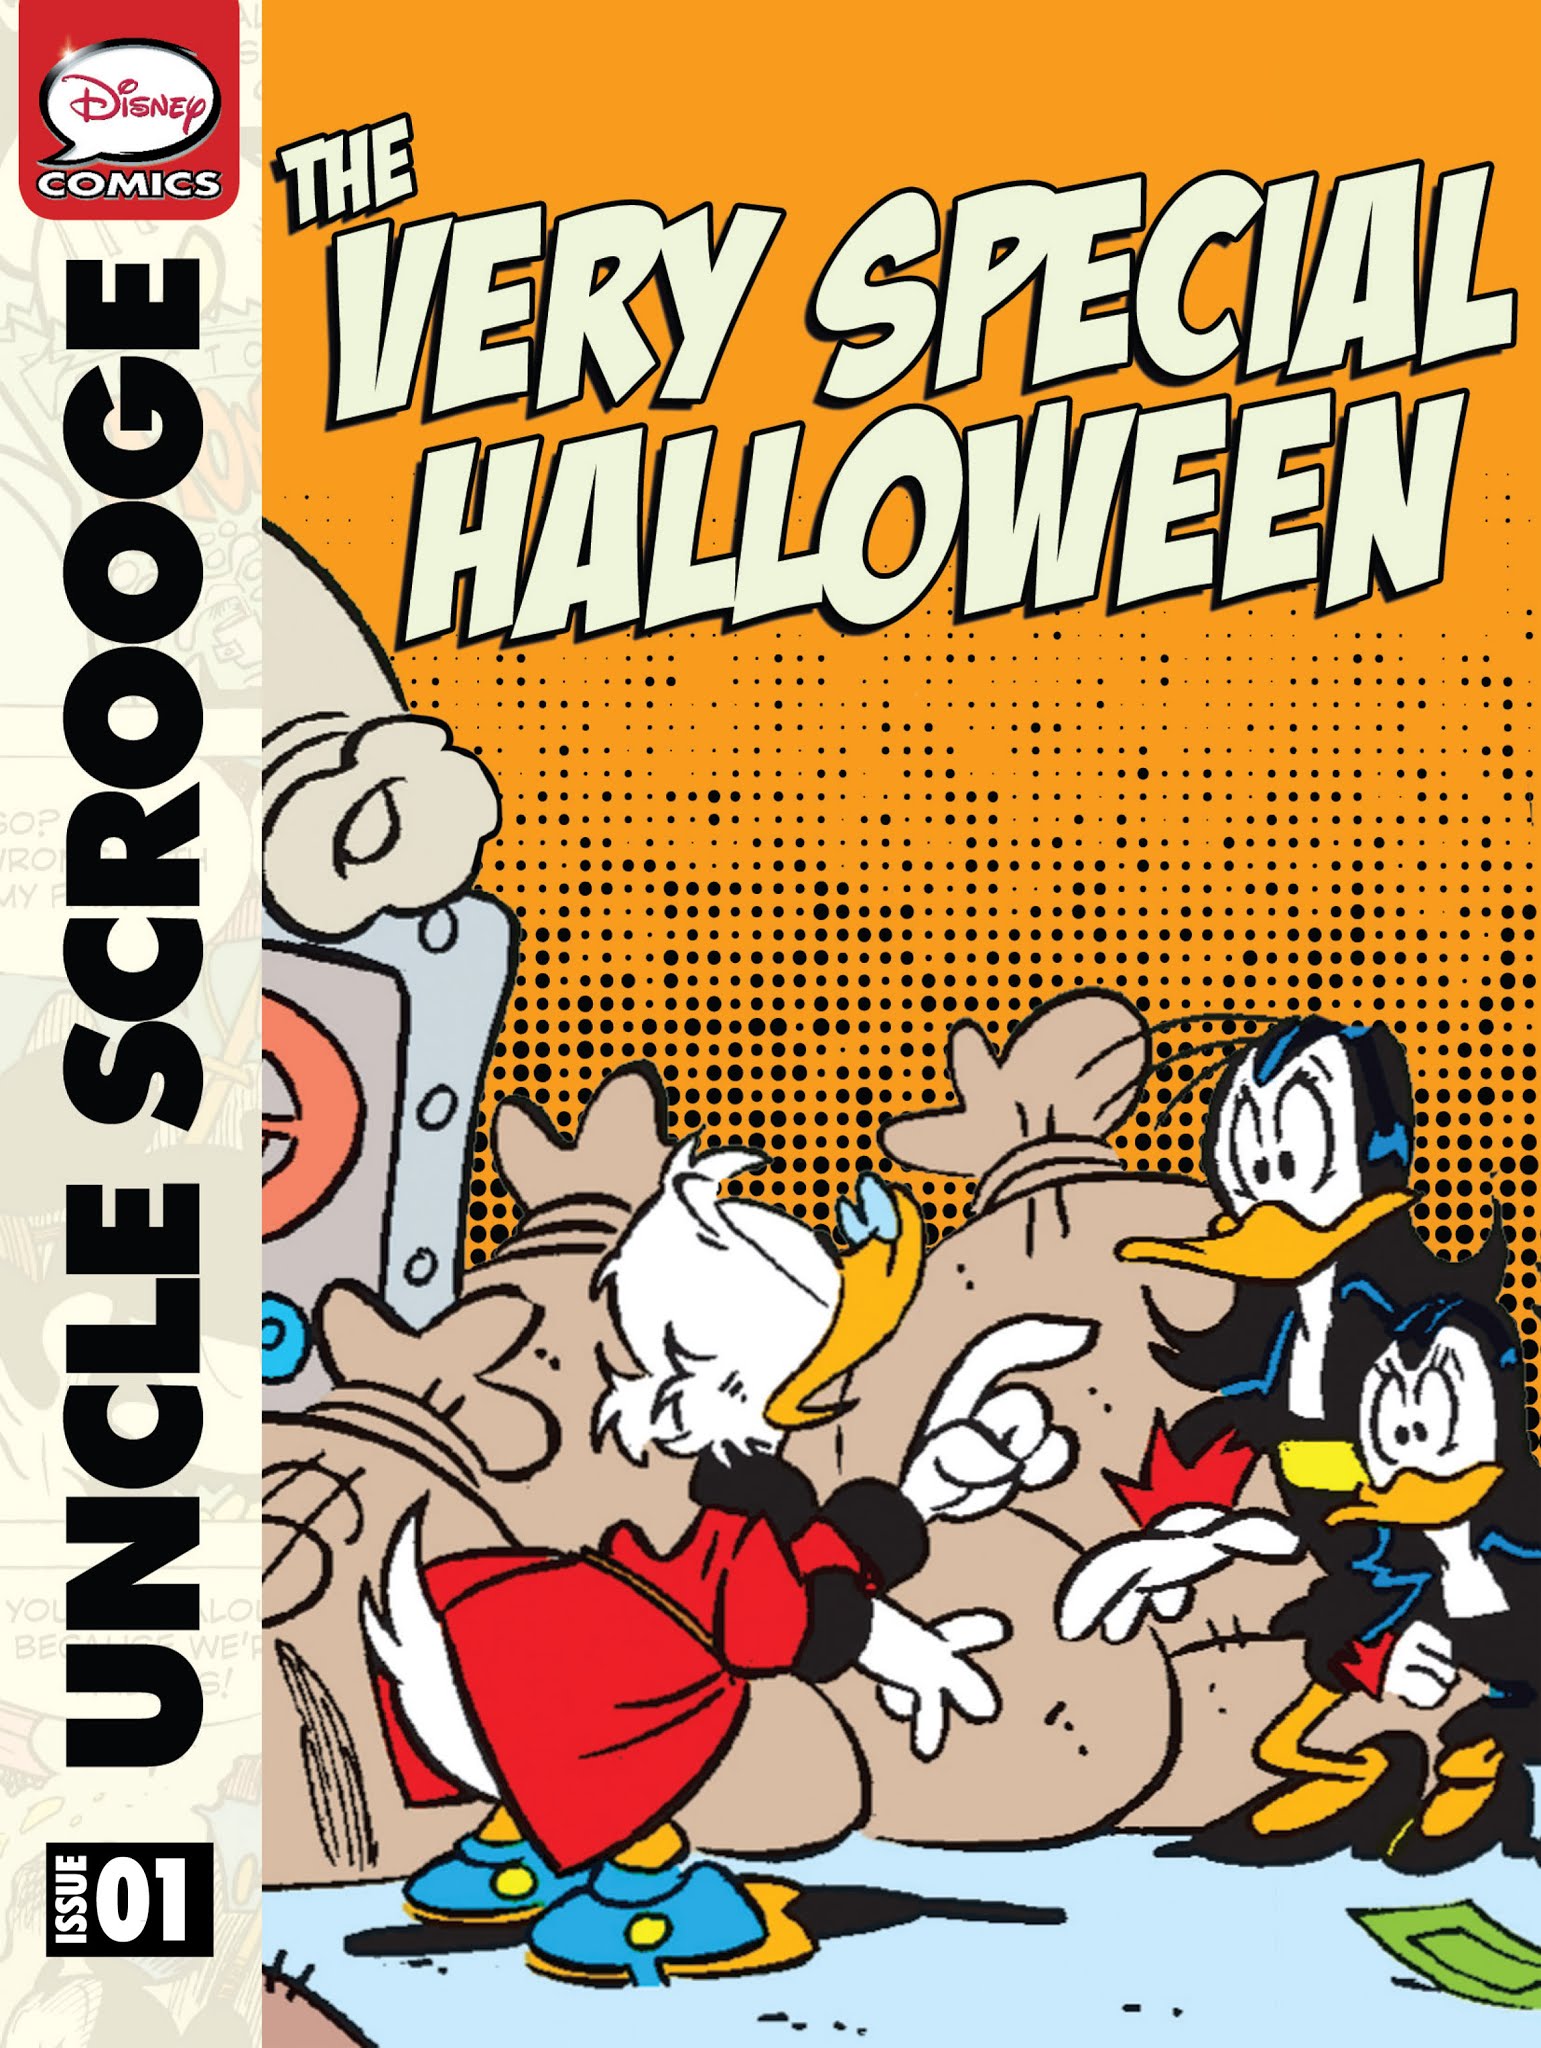 Read online Scrooge McDuck and the Very Special Halloween comic -  Issue # Full - 1